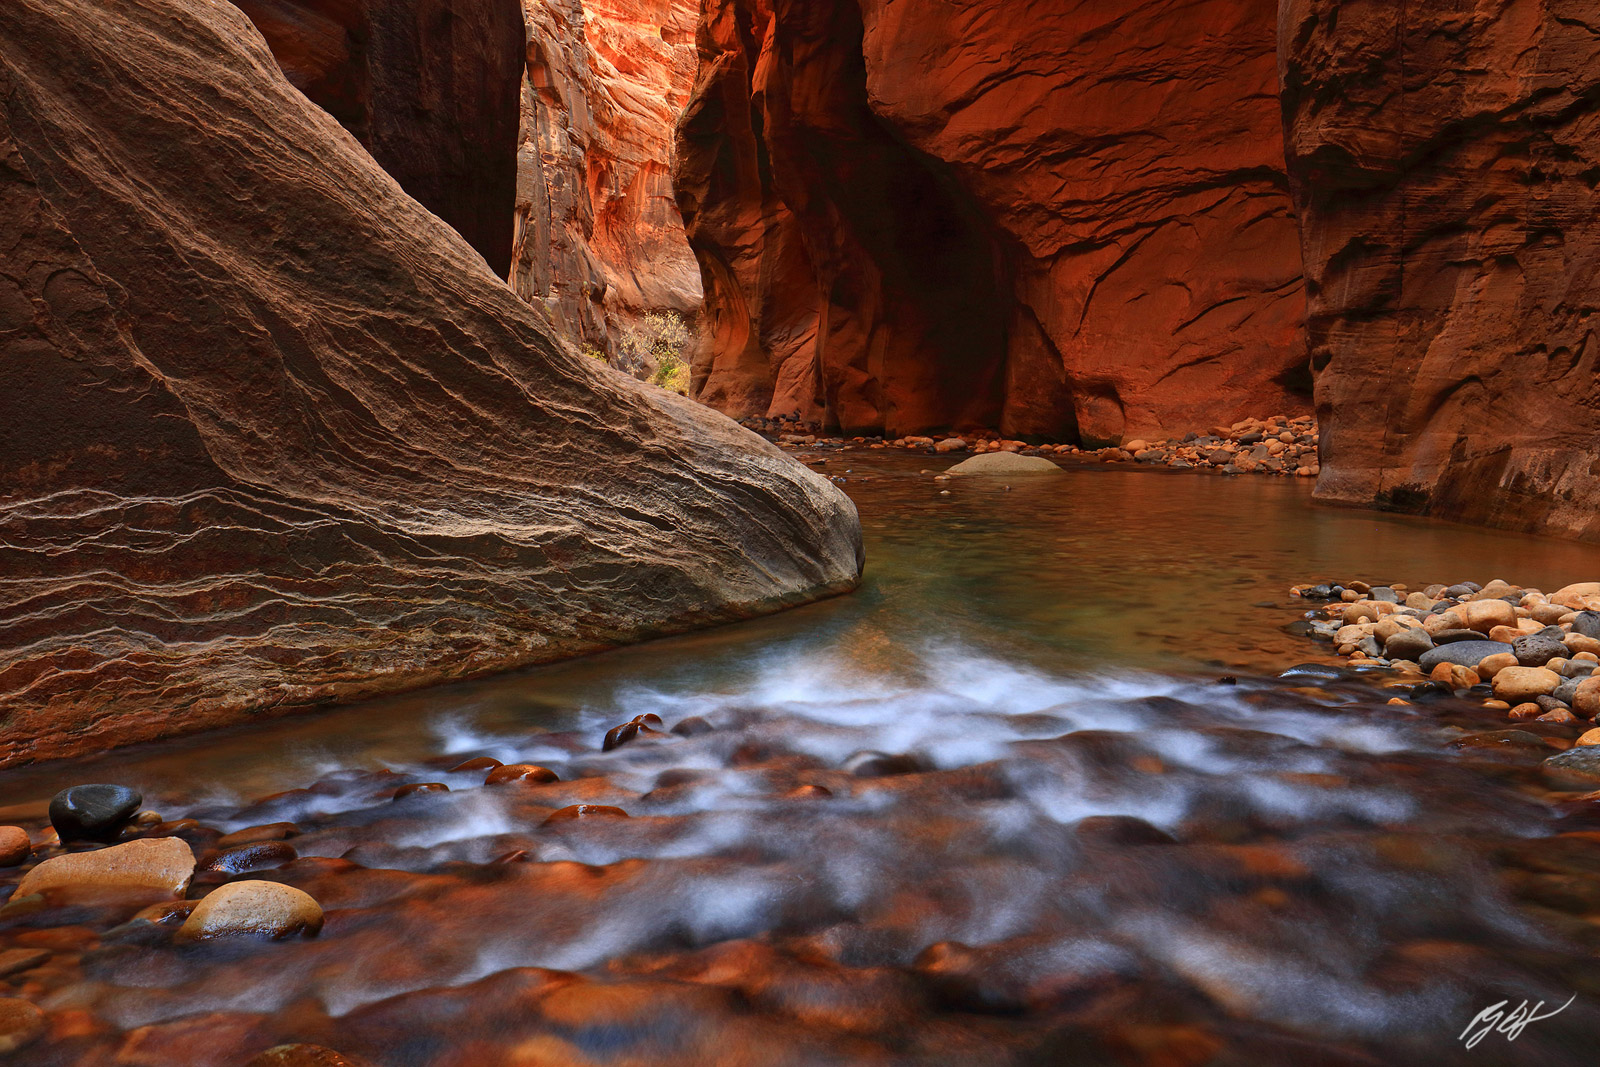 The Virgin River as it flows through The Narrows in Zion National Park in Utah